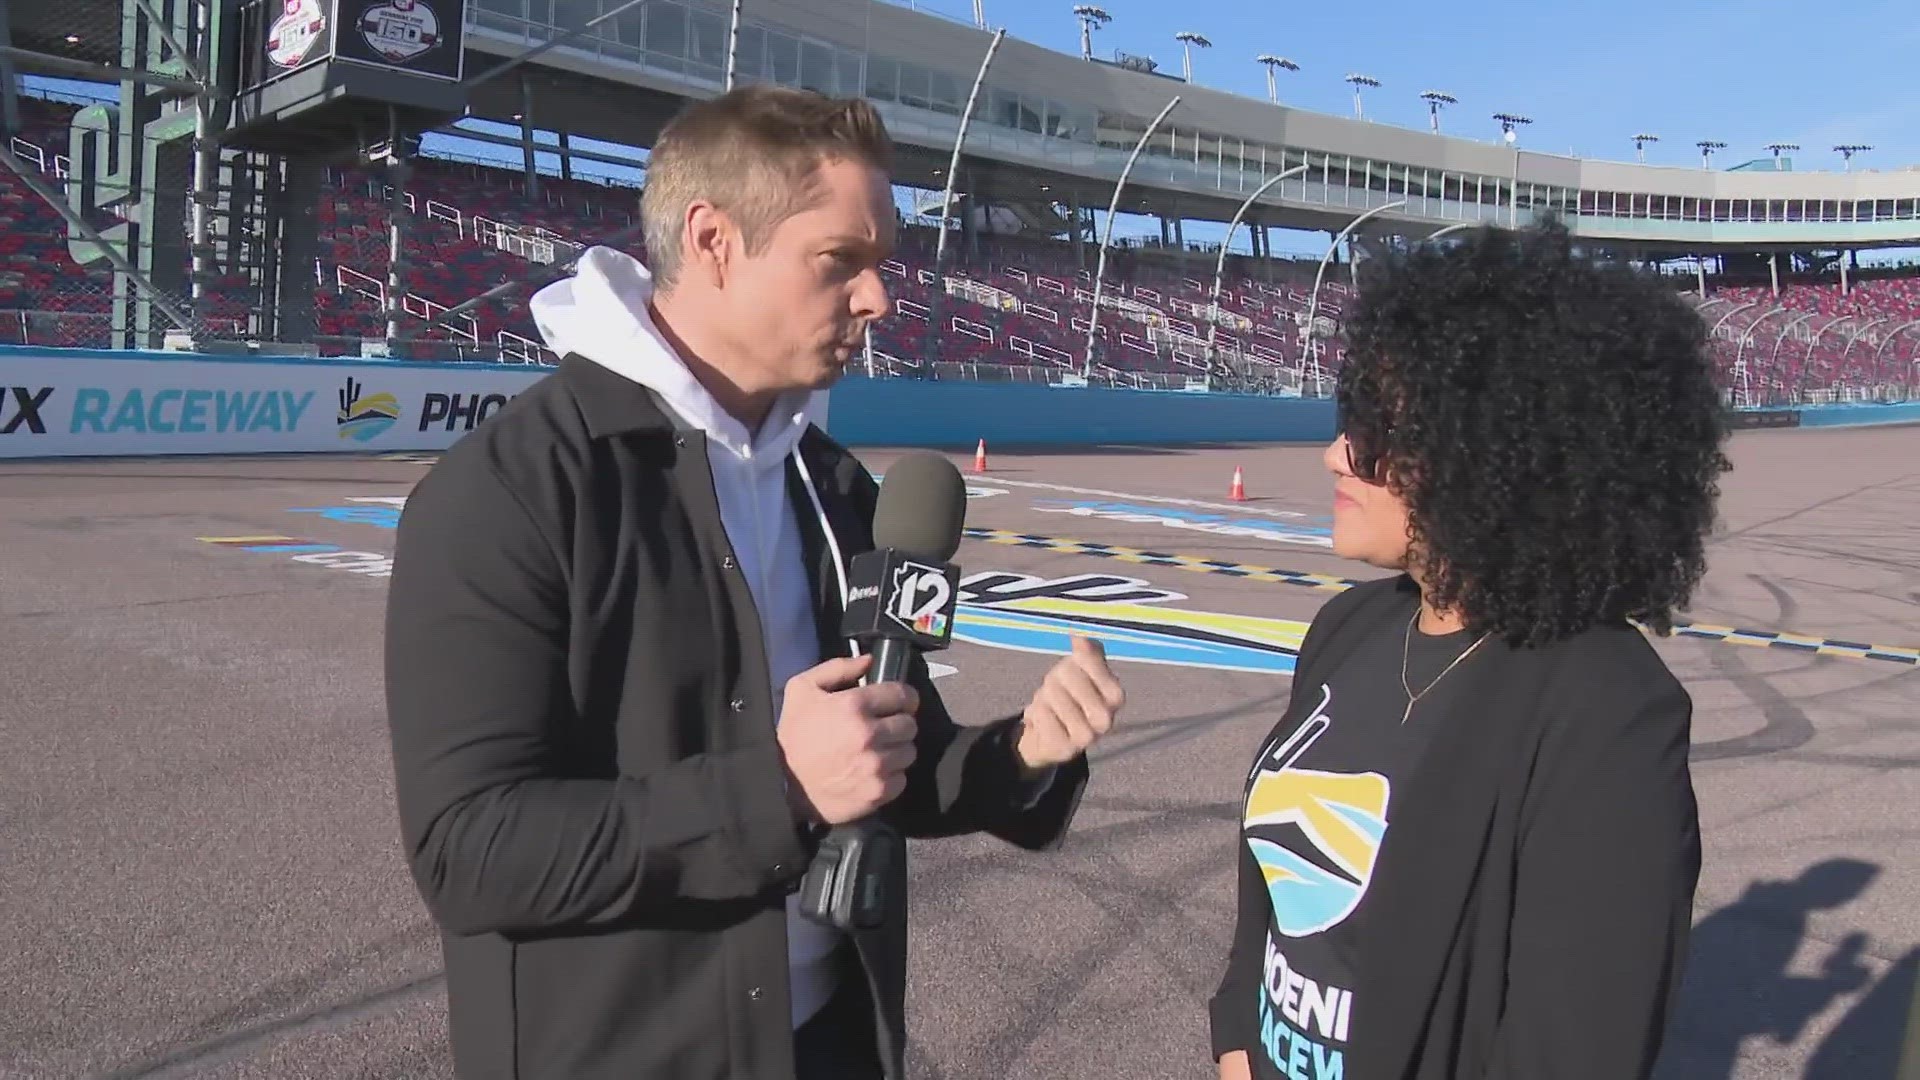 The new track president at Phoenix Raceway is ready to make history. Latasha Causey is the first female African American track president in NASCAR history.